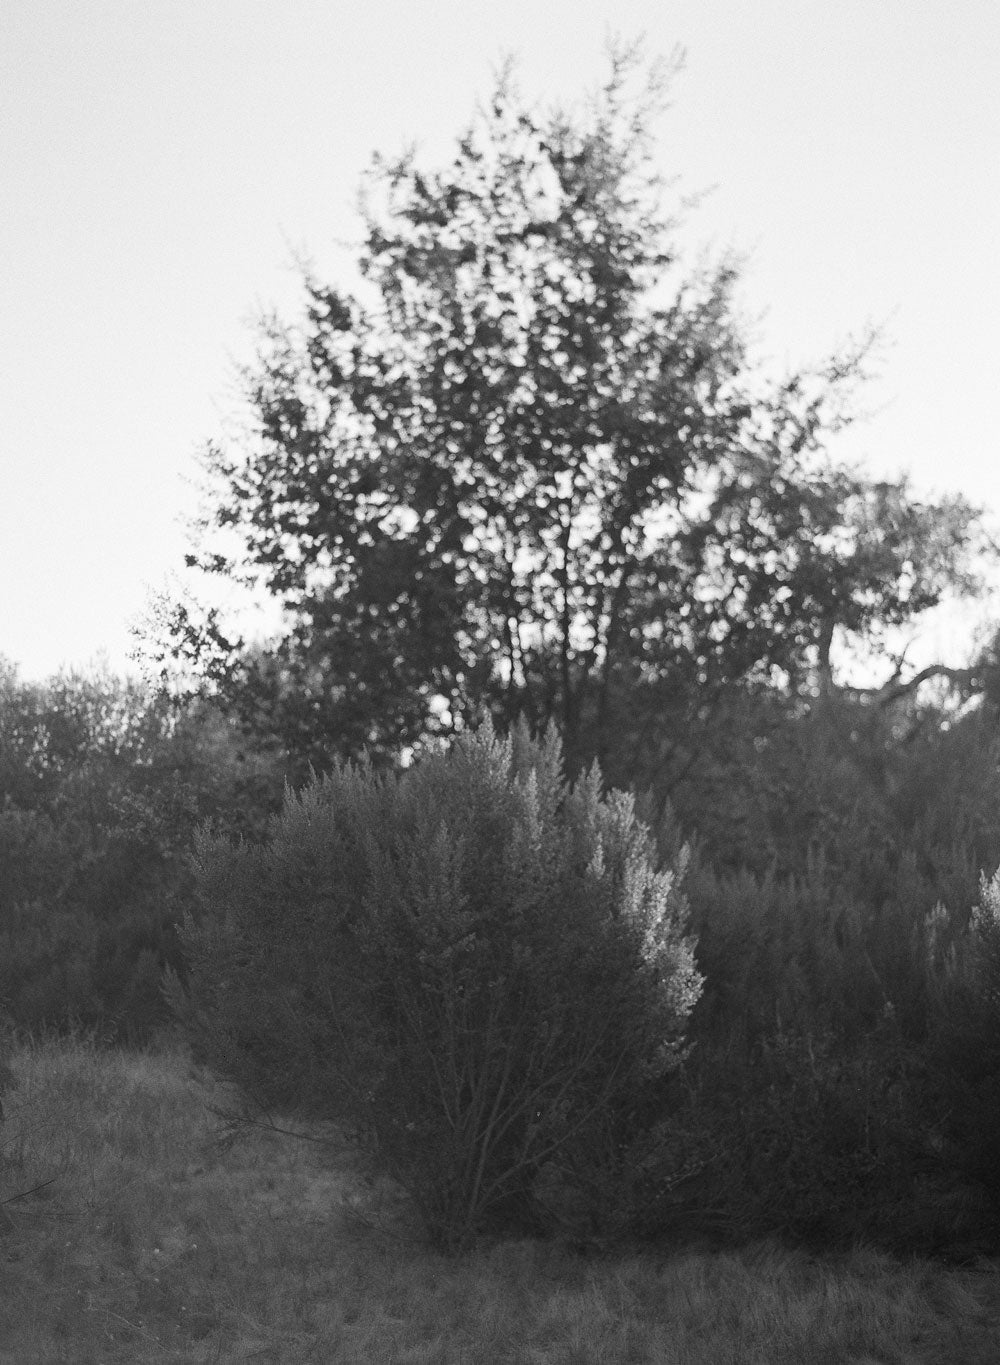 Ilford HP5+, 35mm, 100 ft., Black and White Film